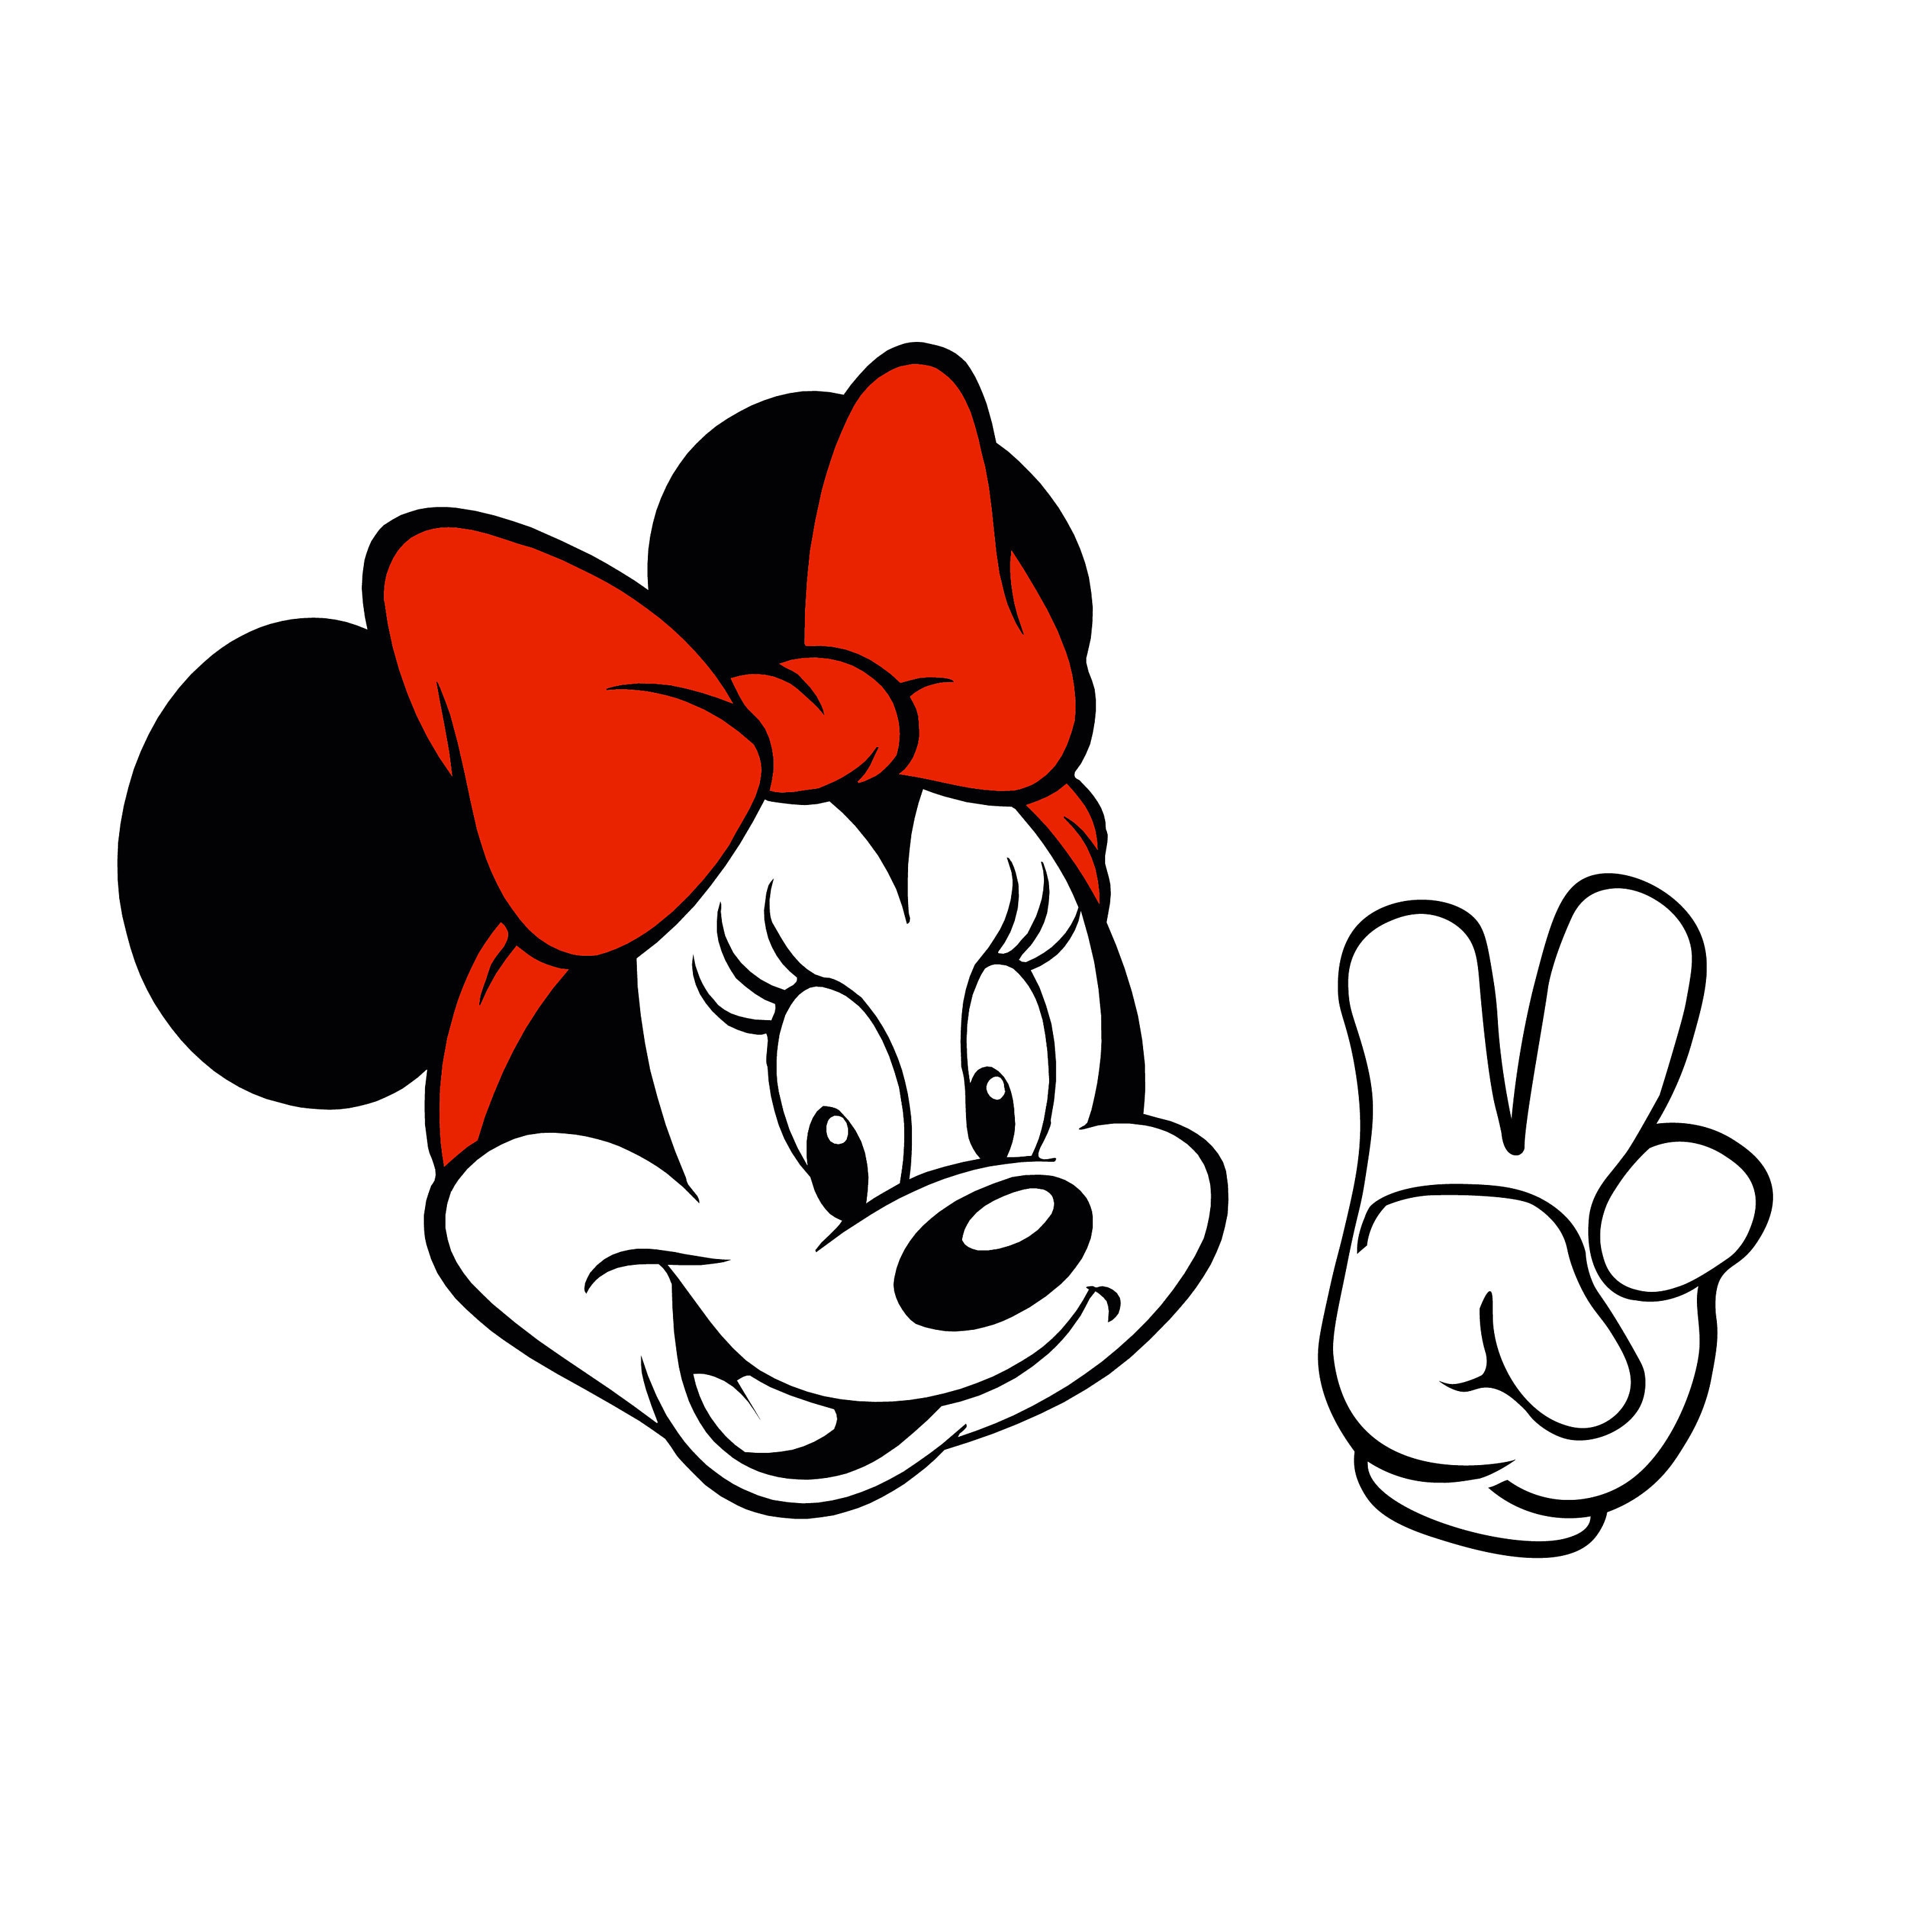 Download Minnie Mouse Eyes Closed Svg Photos Download JPG, PNG, GIF ...